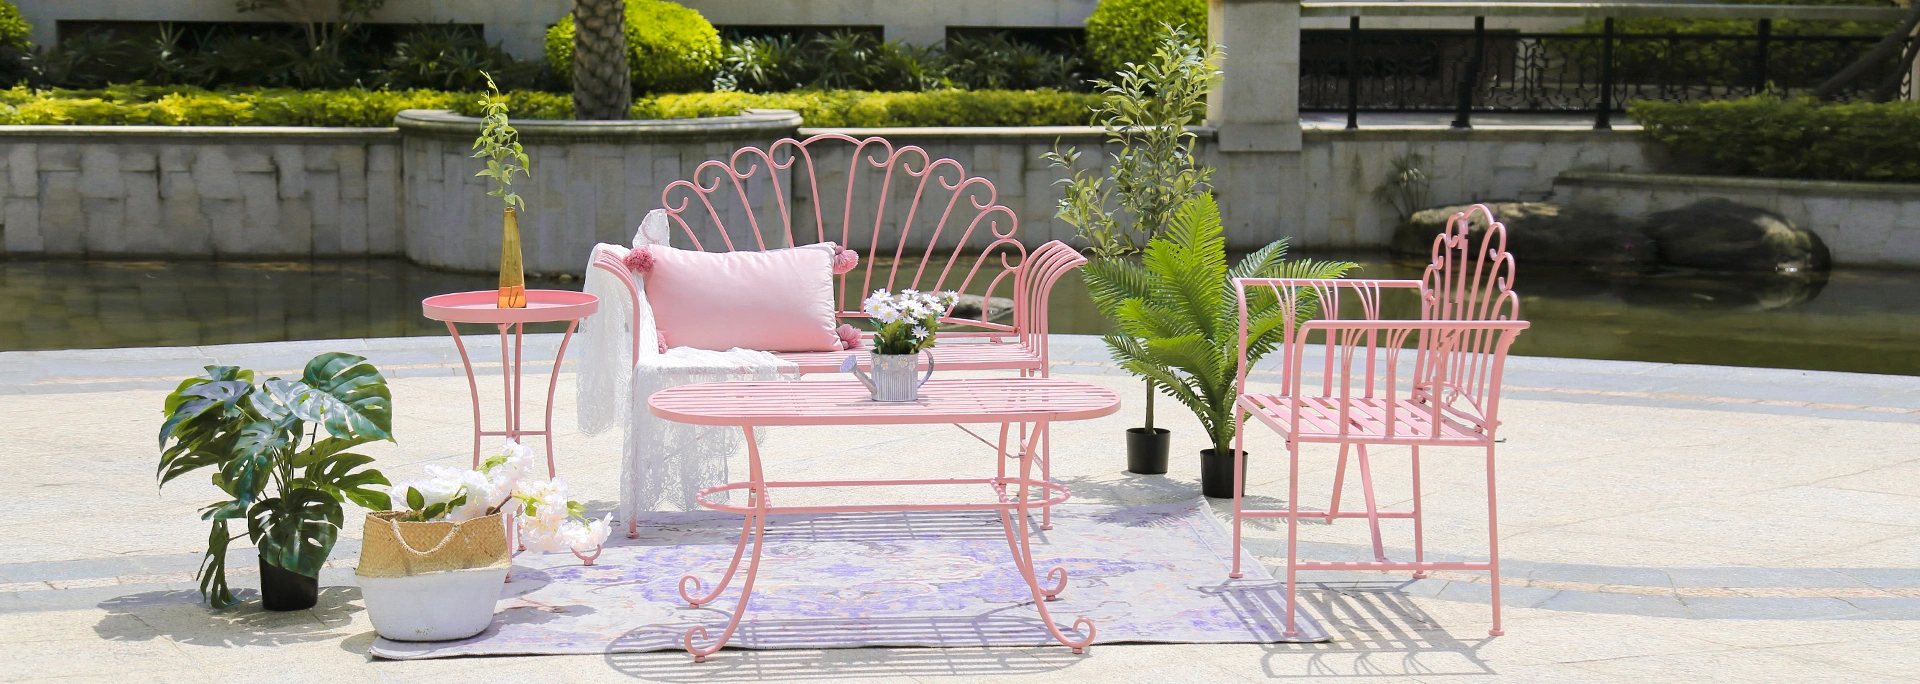 10 Best Wrought Iron Furniture Factory in China